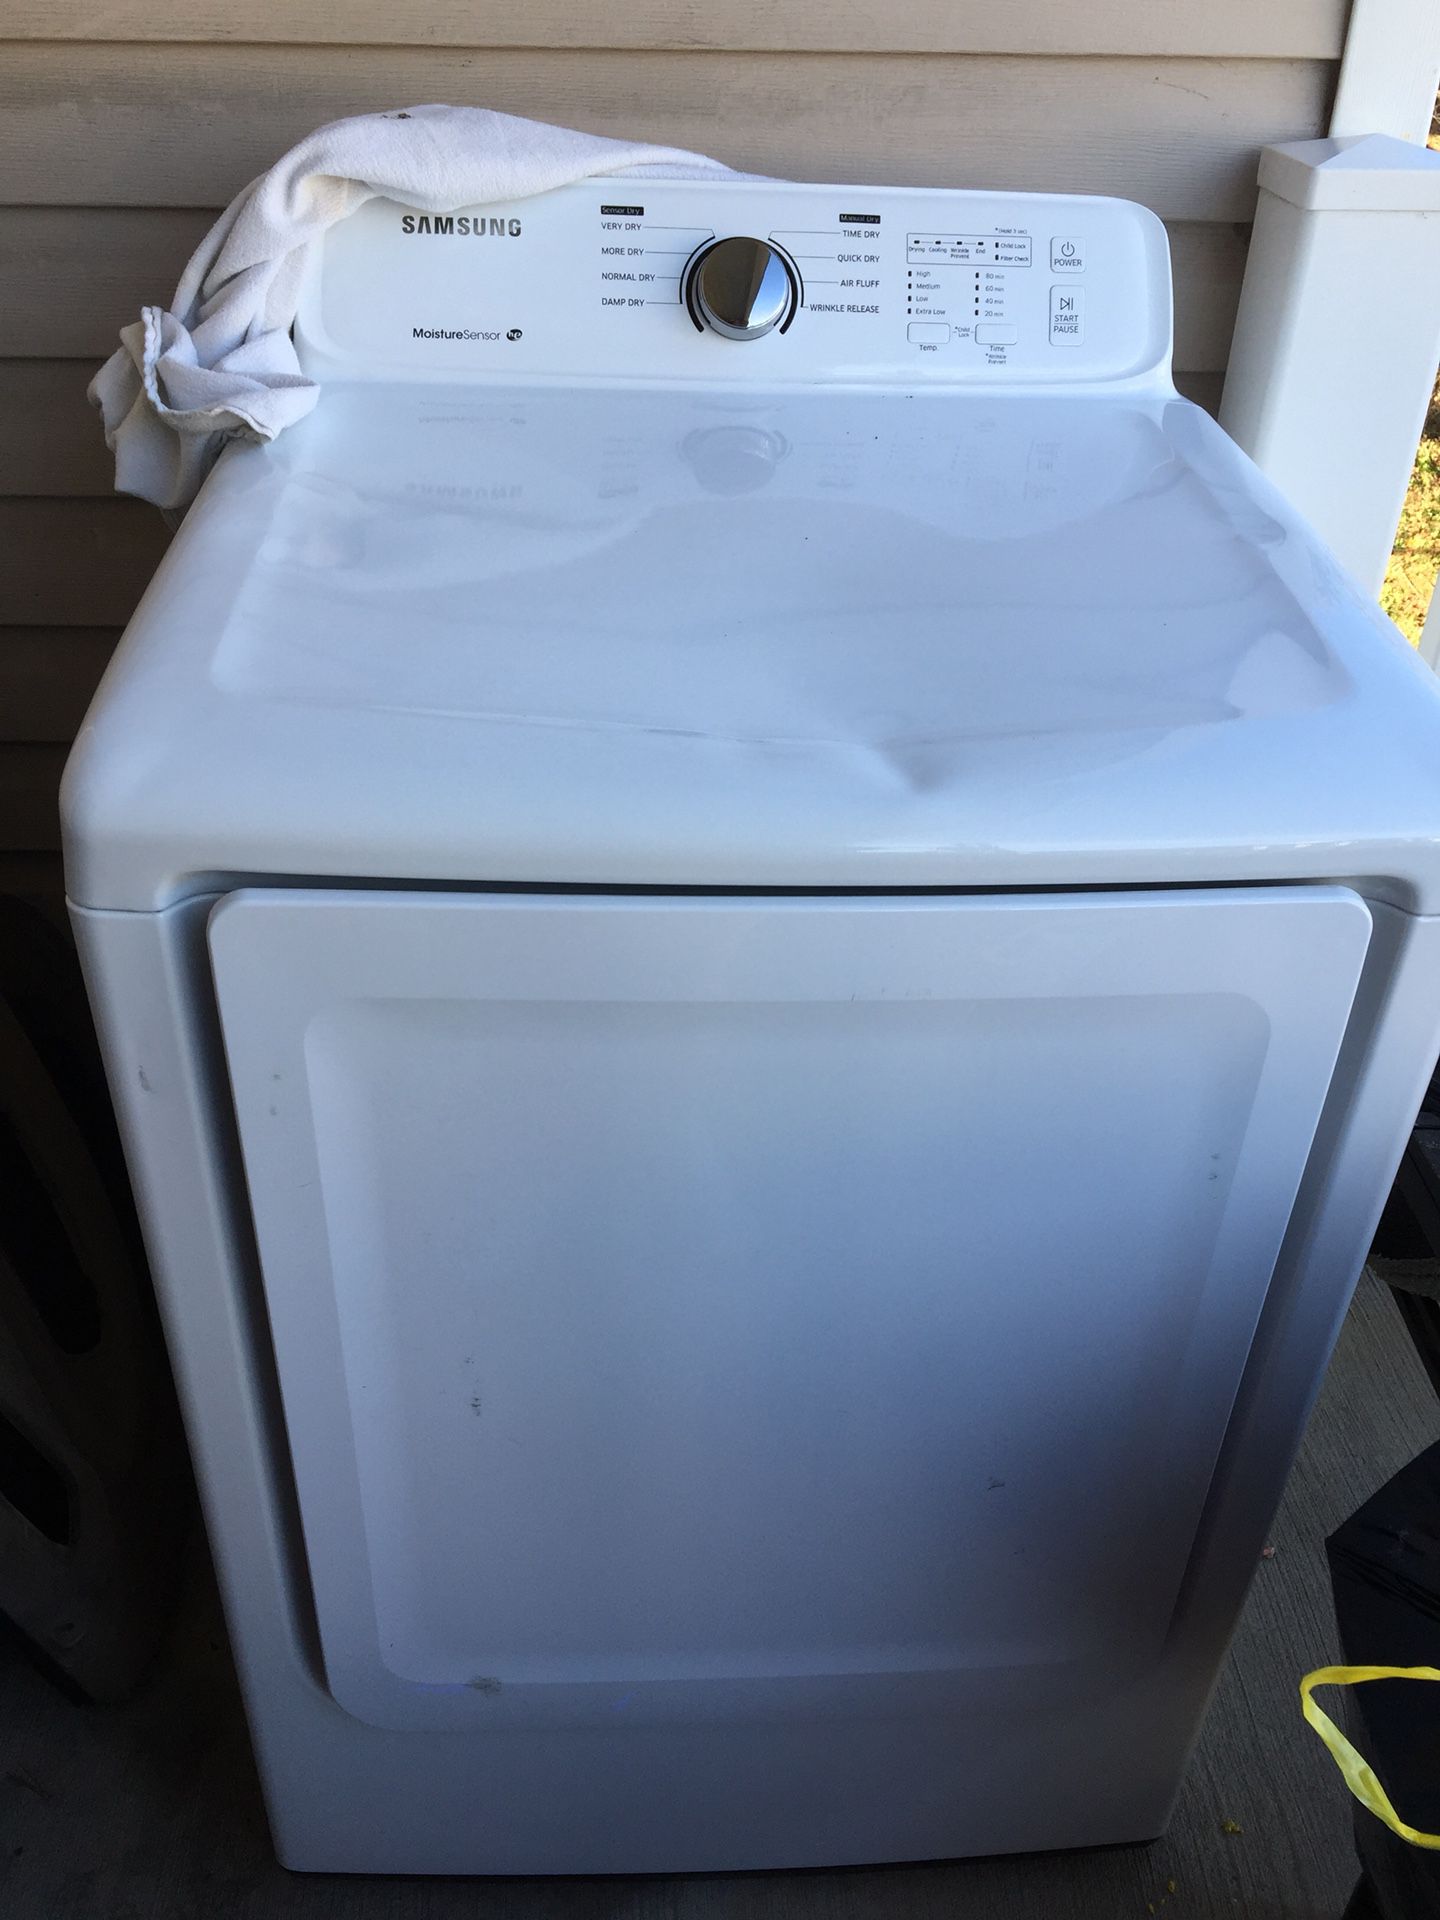 Whirl pool washer & Samsung dryer